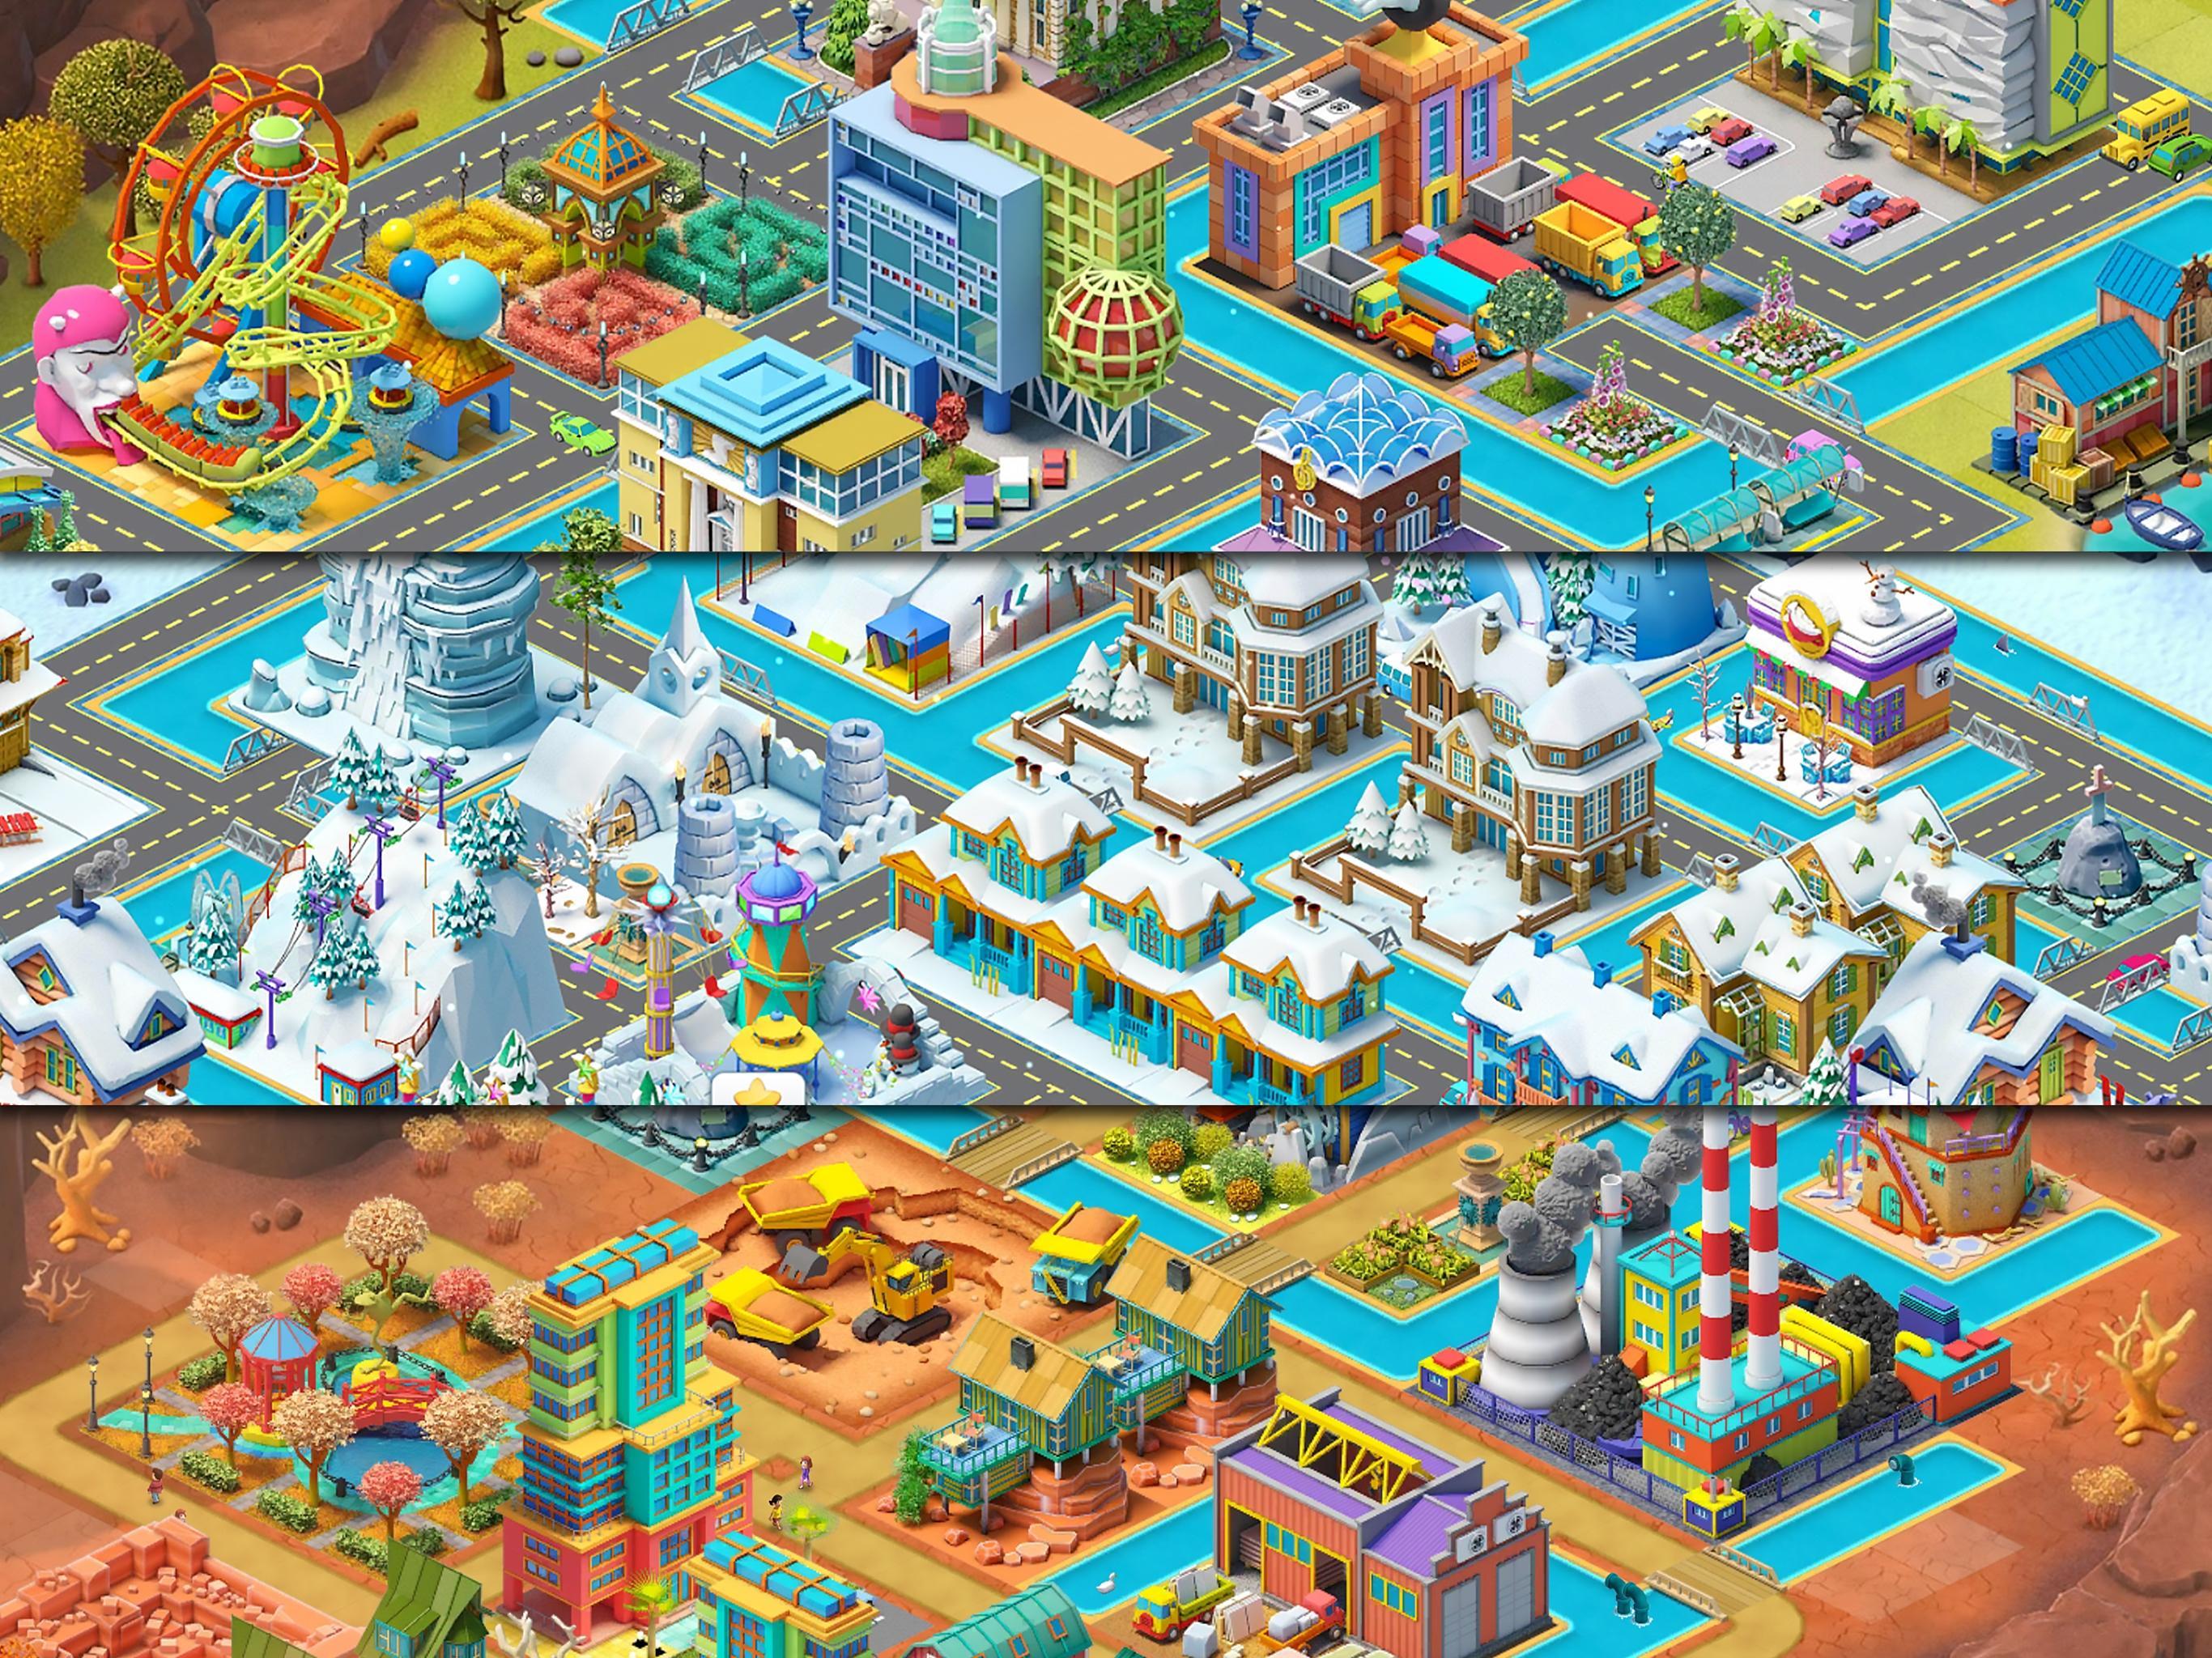 What your city town or village is. Global City игра. Город Парадайз игра. Таун Сити Билдинг. Village Town игра.